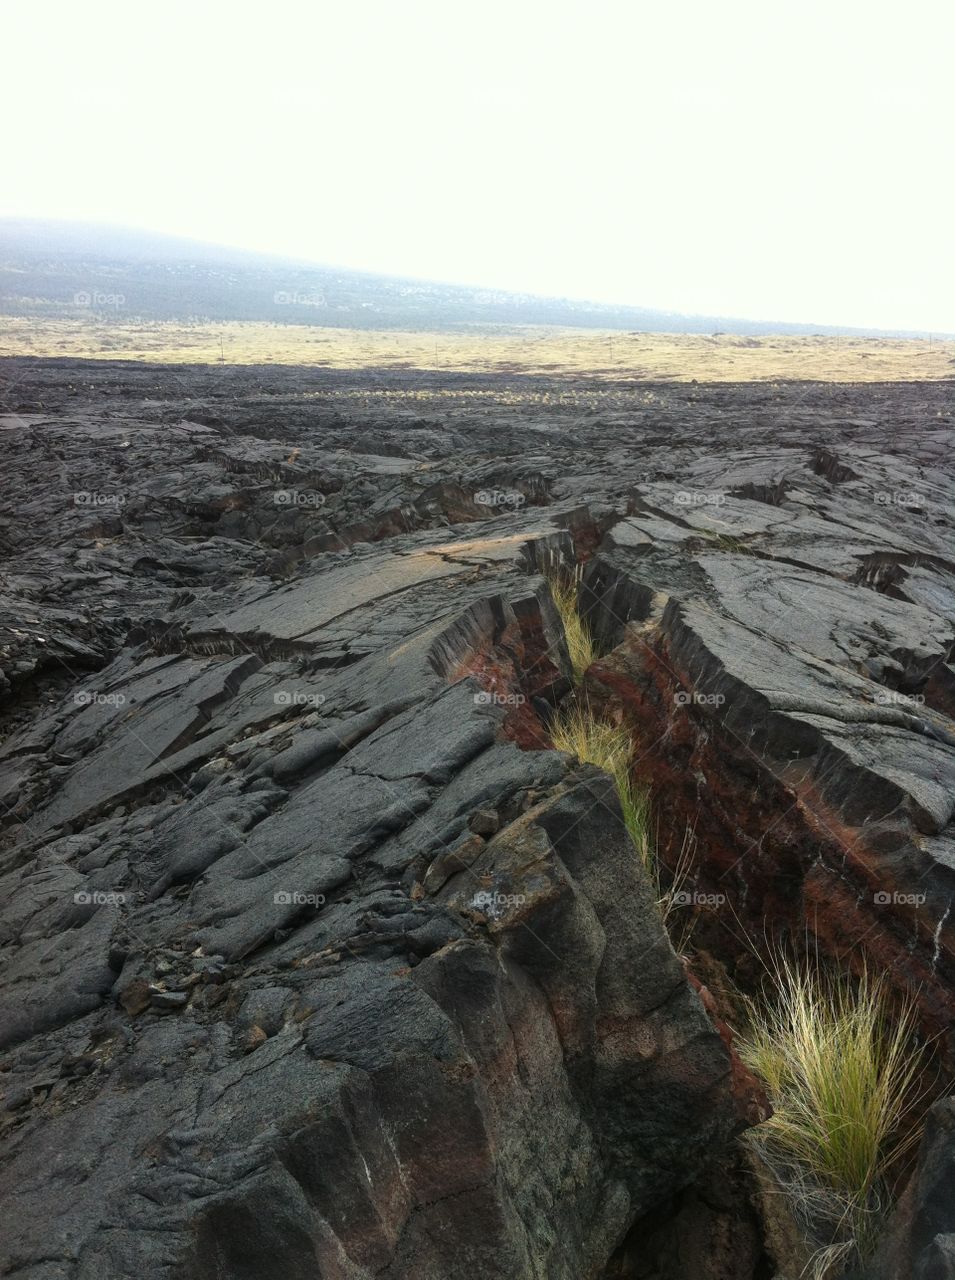 Life After Lava. Lava destroys nearly everything in it's path. It's amazing how life perseveres after such destruction.